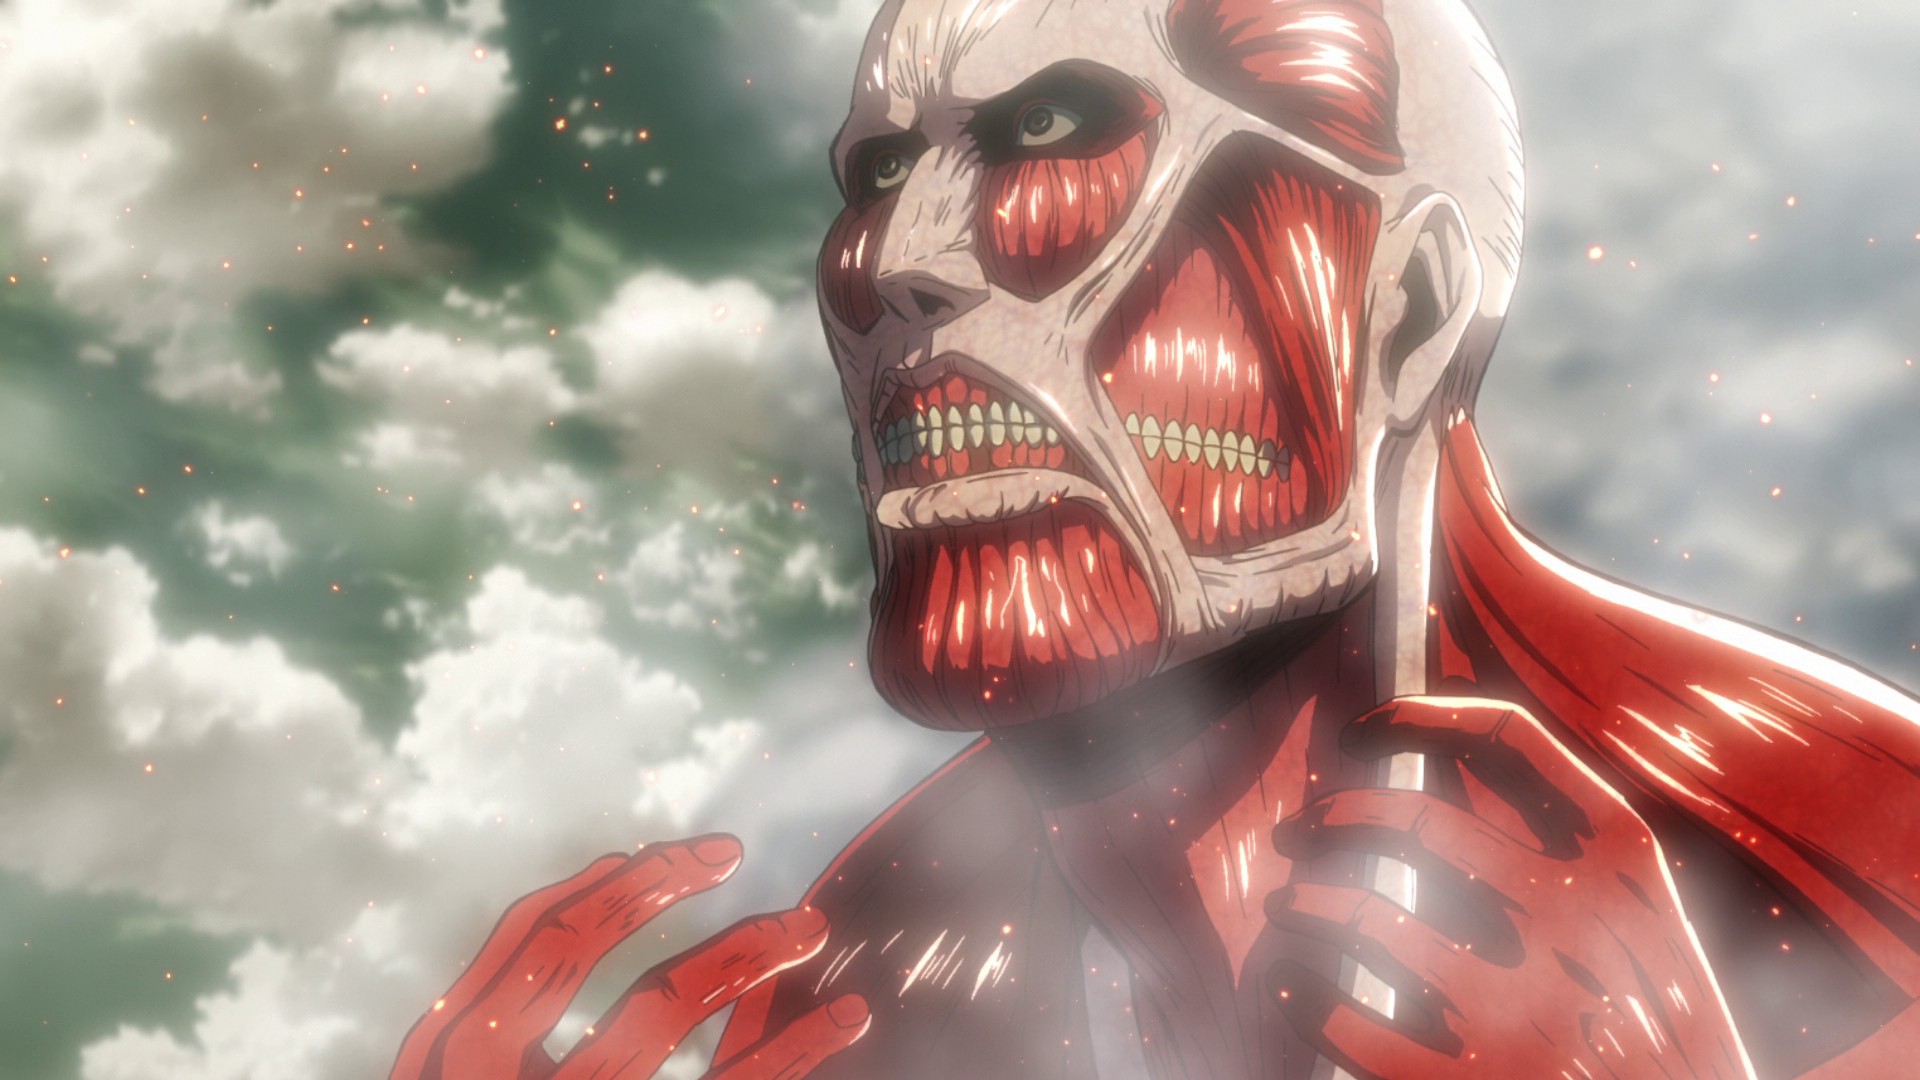 Attack on Titan Watch Order Anime Series And Movies